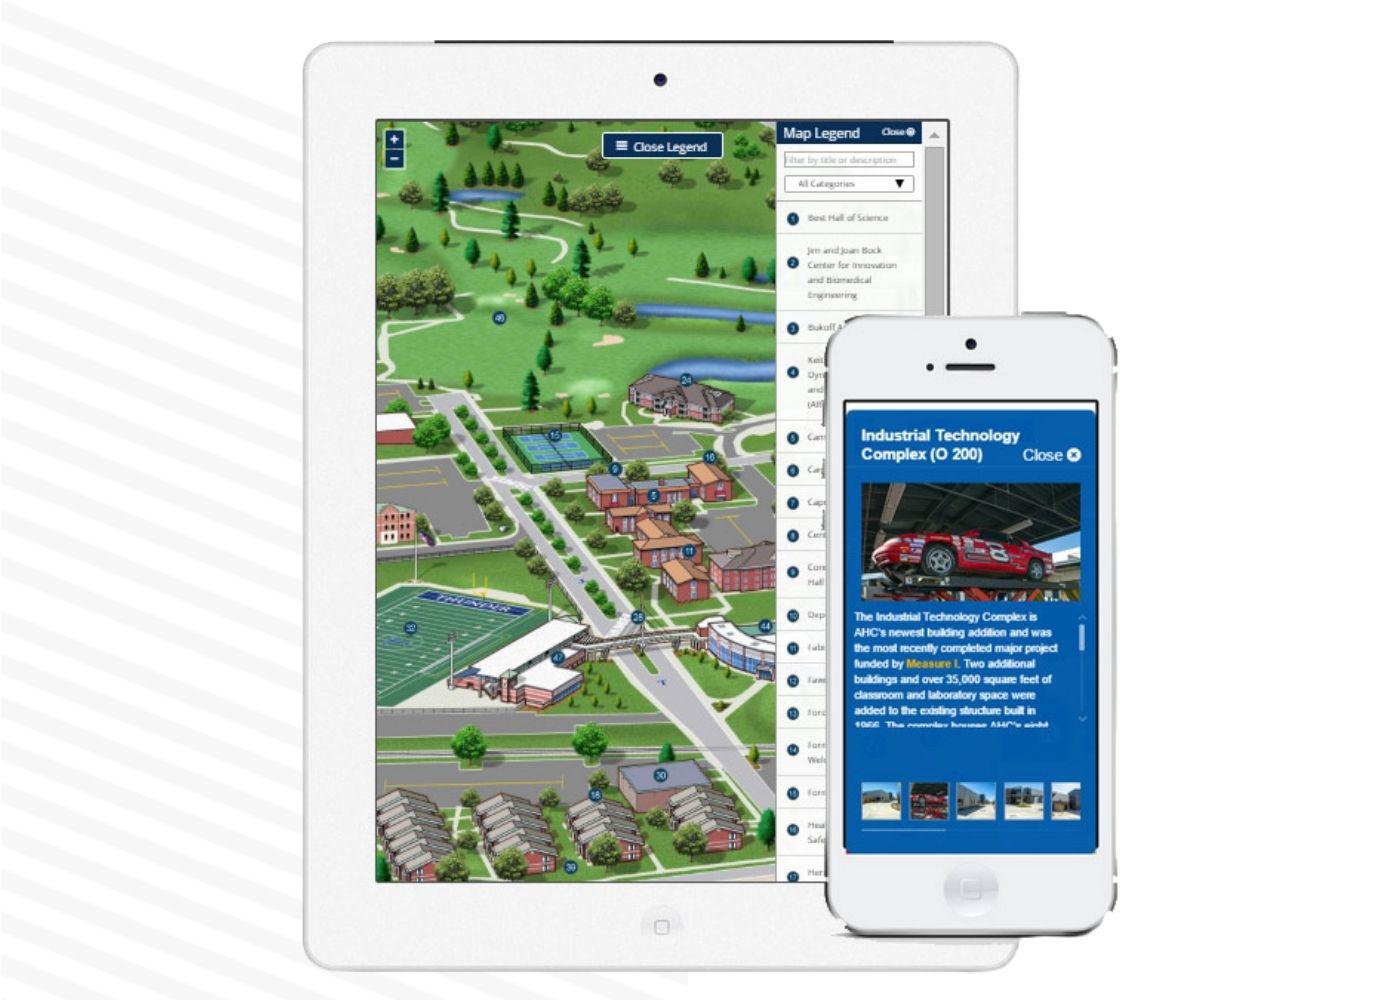 Our campus maps are designed for PC and mobile browsing on iOS and Android operating systems.